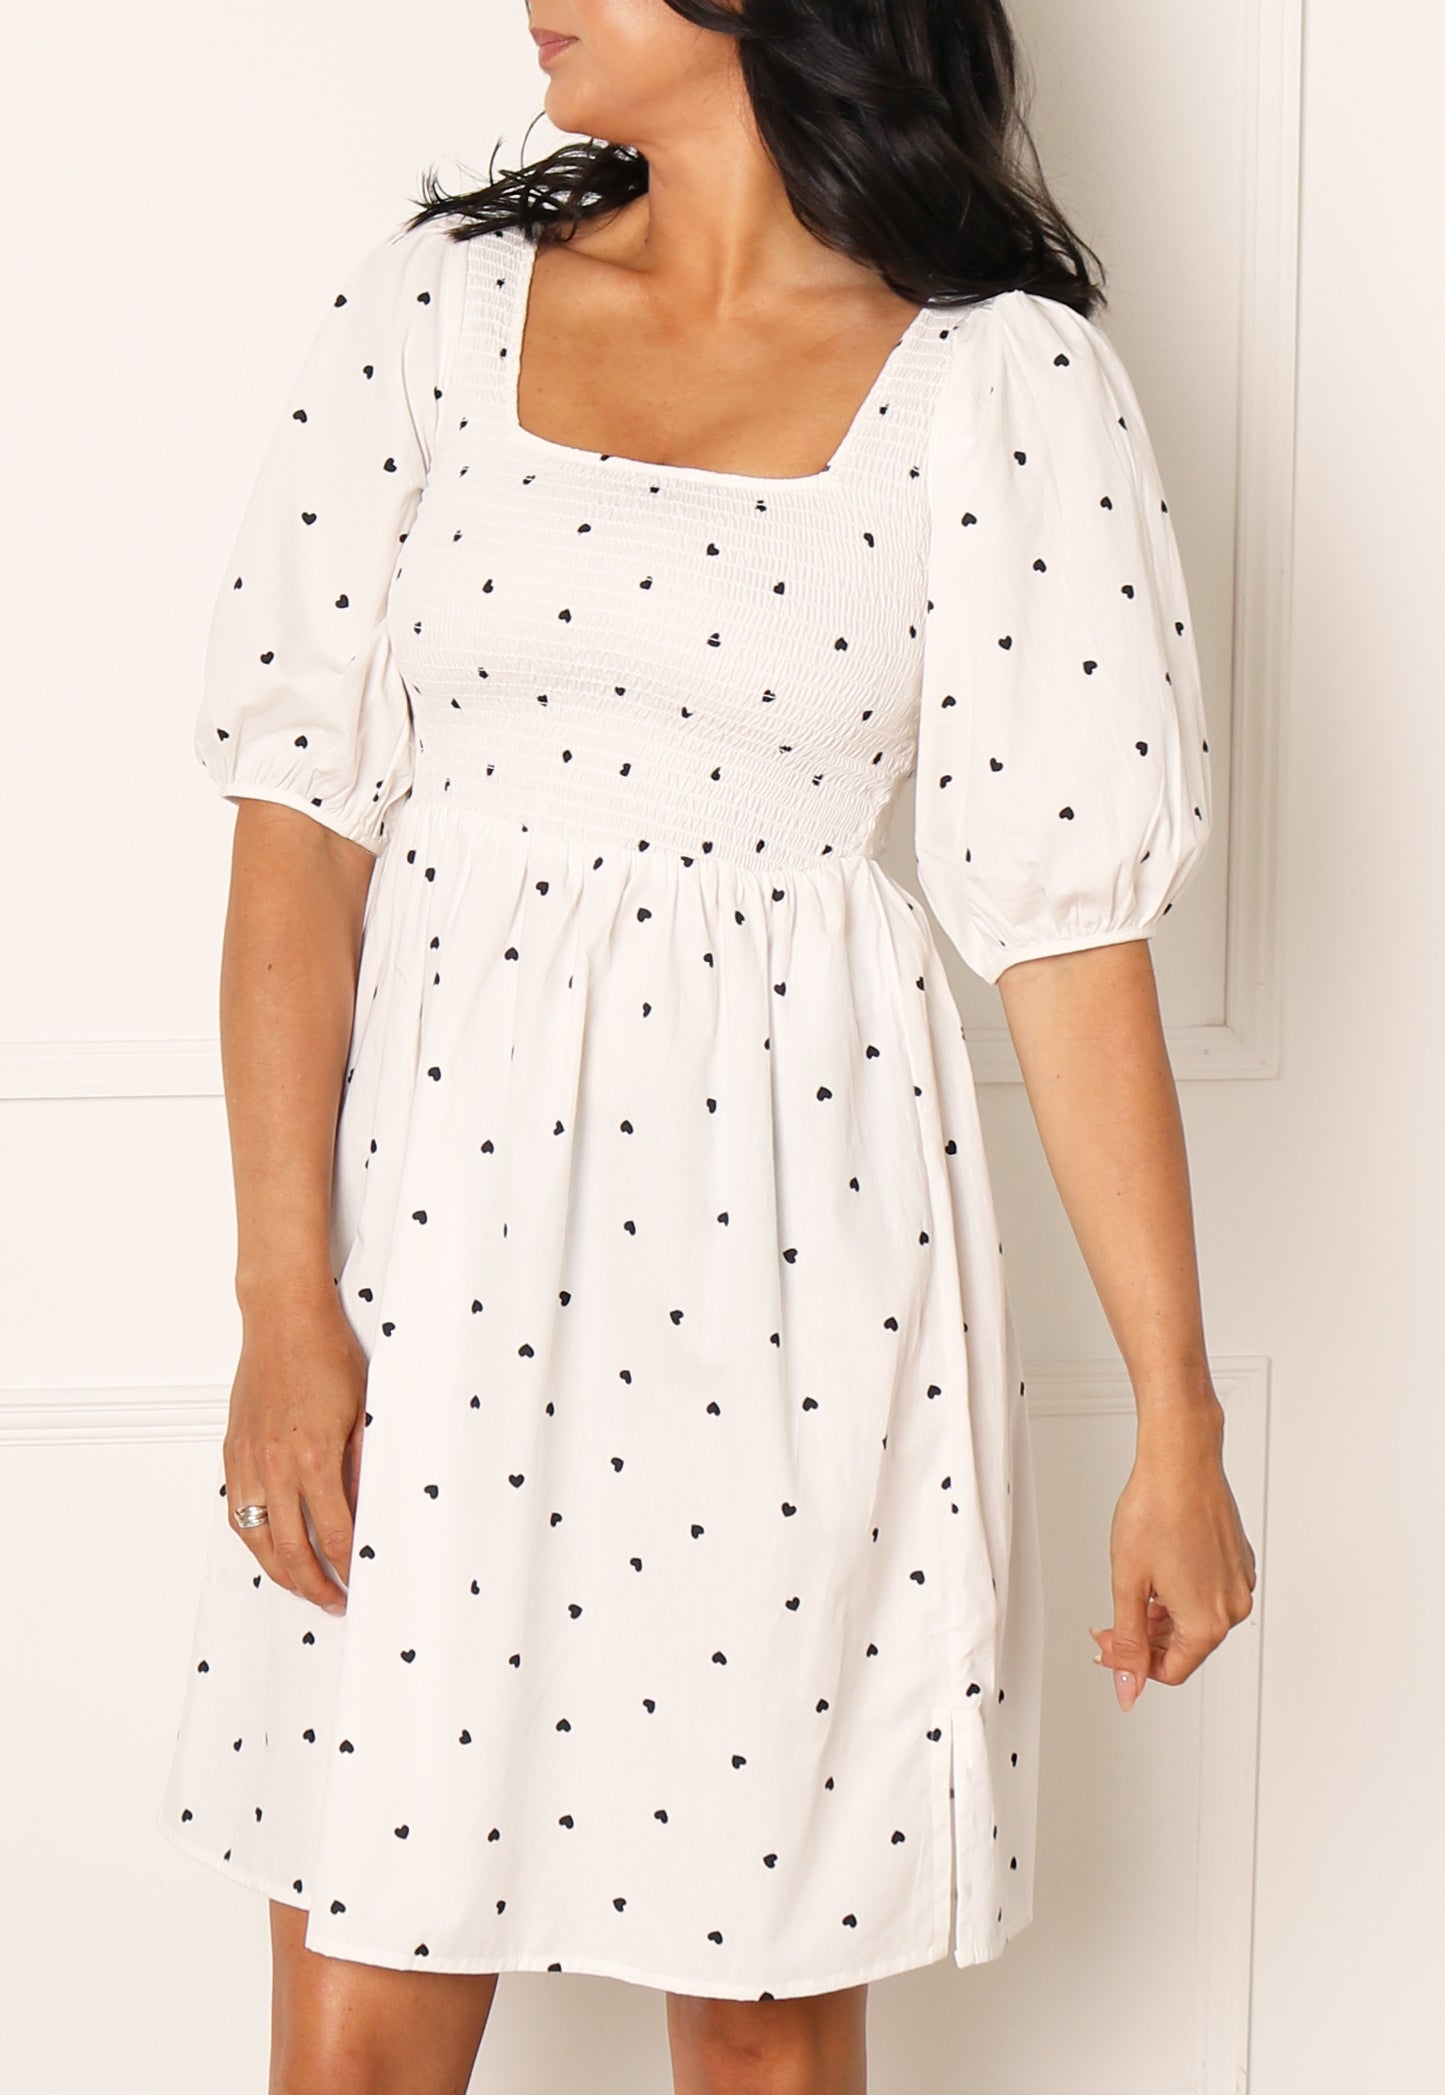 ONLY Brooklyn Heart Print Shirred Top Cotton Mini Dress in White & Black - One Nation Clothing